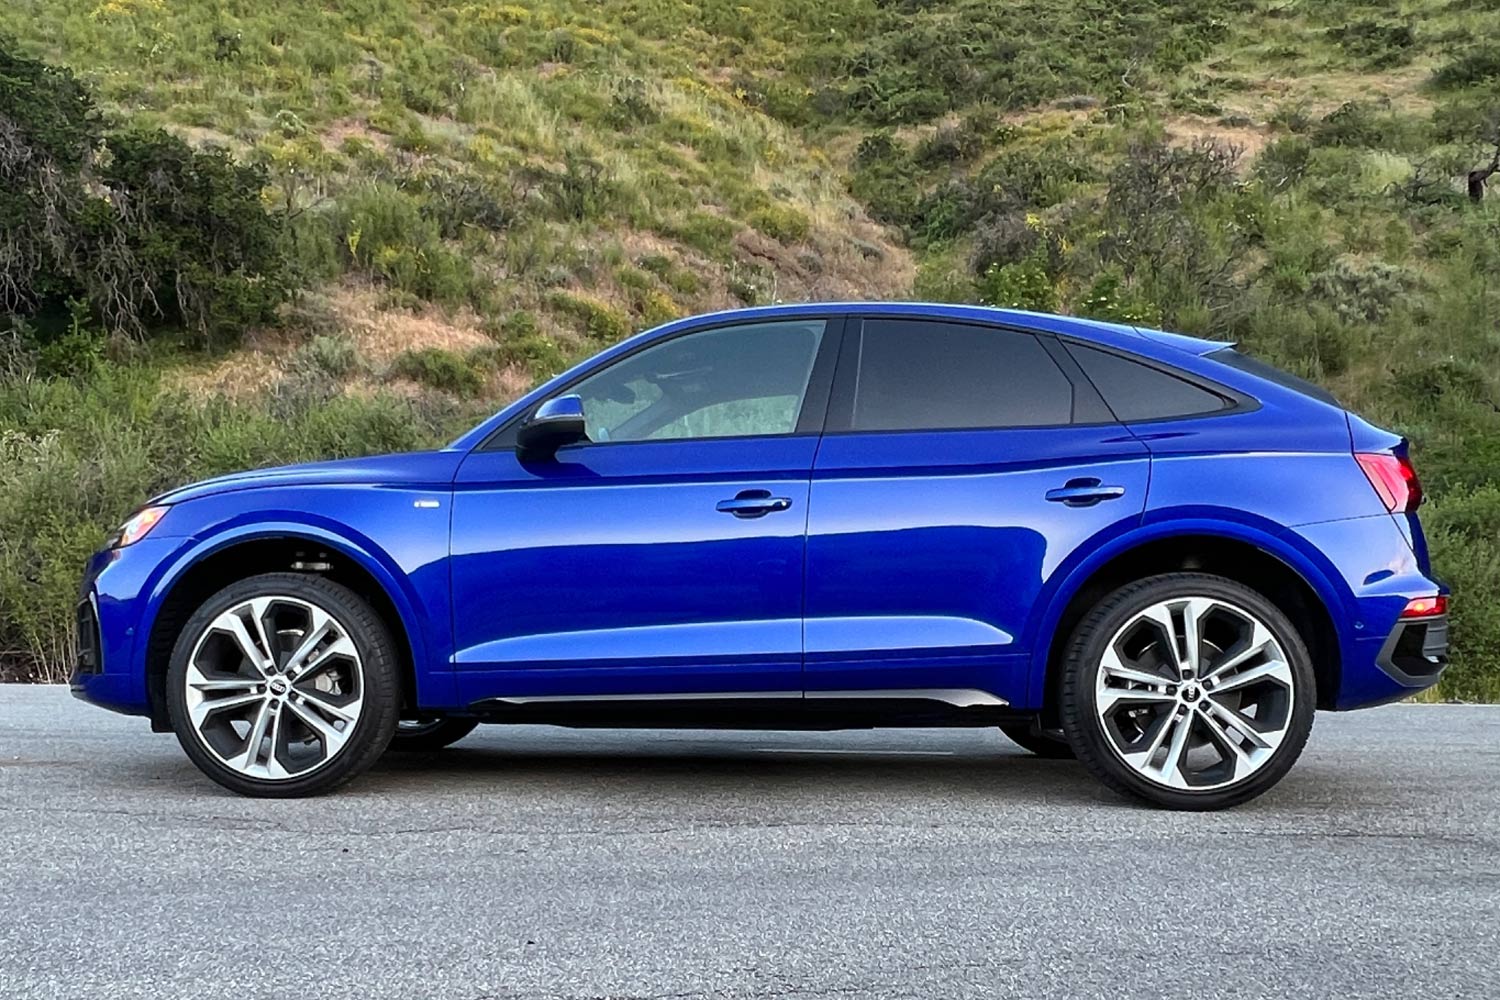 Side view of a blue Audi Q5.